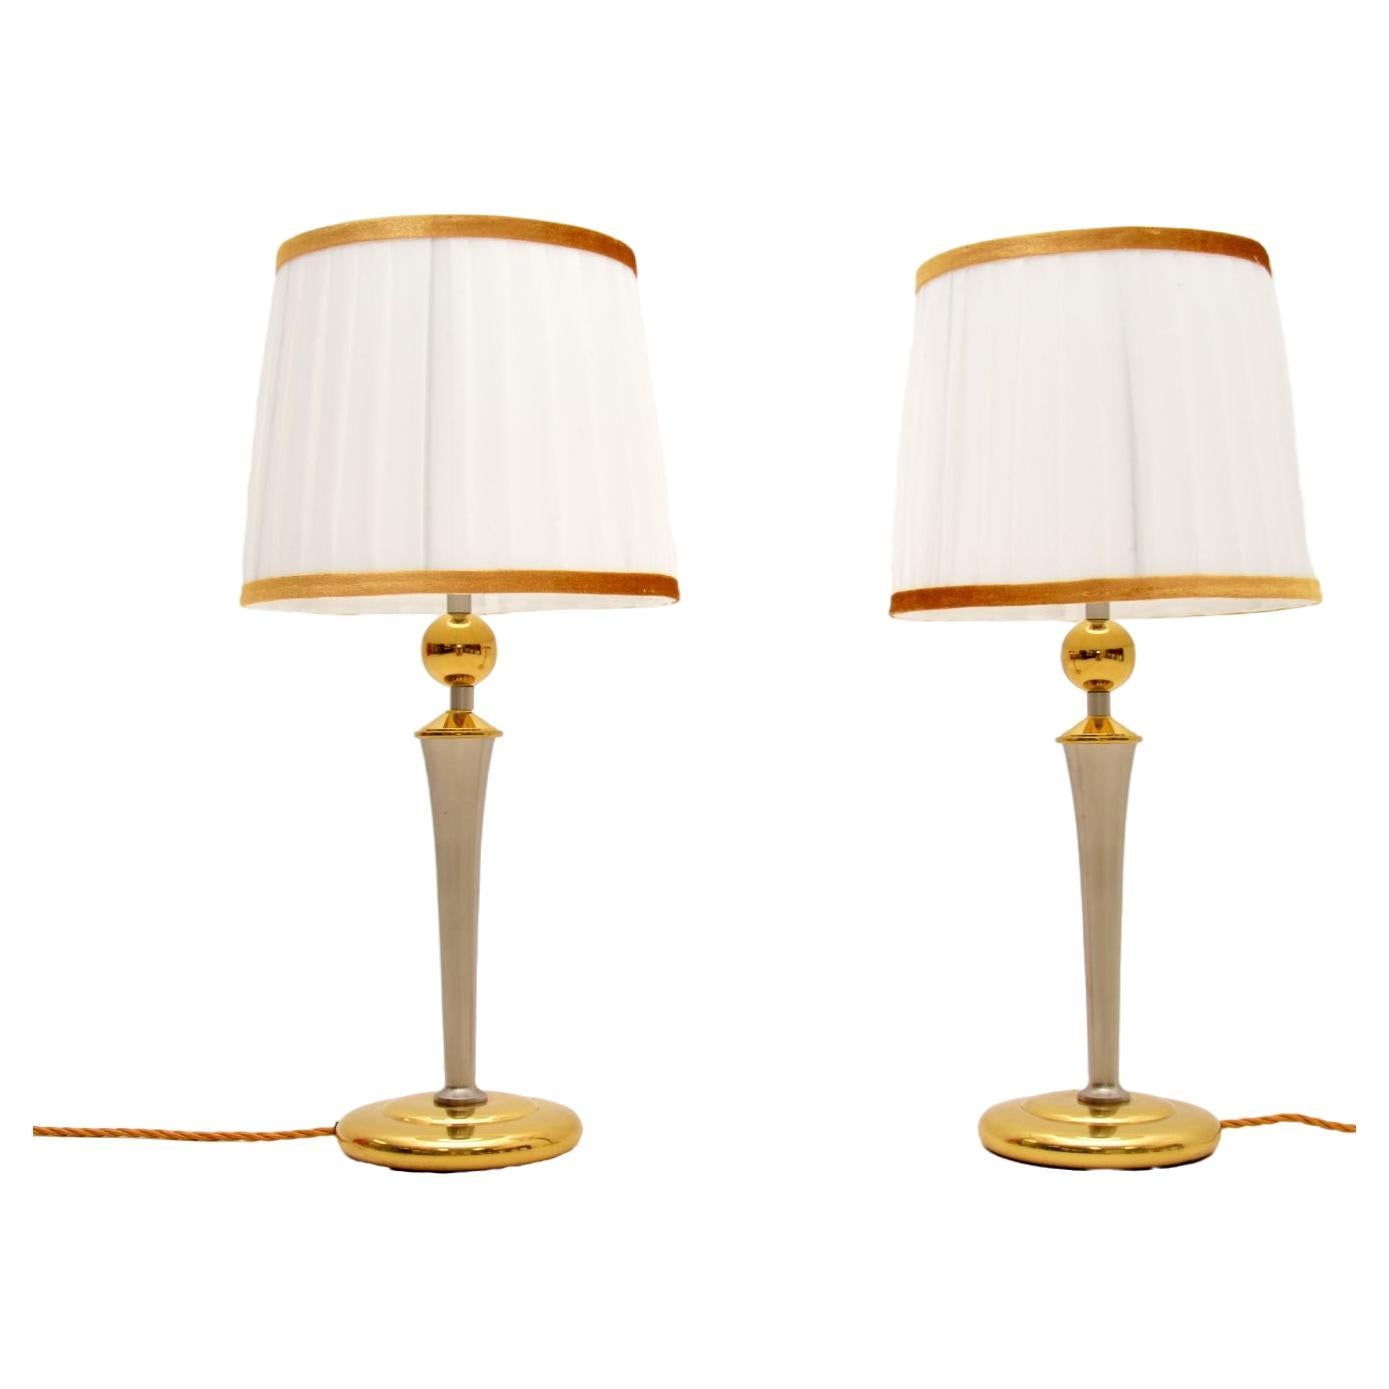 Pair of Vintage Chrome and Brass Table Lamps For Sale